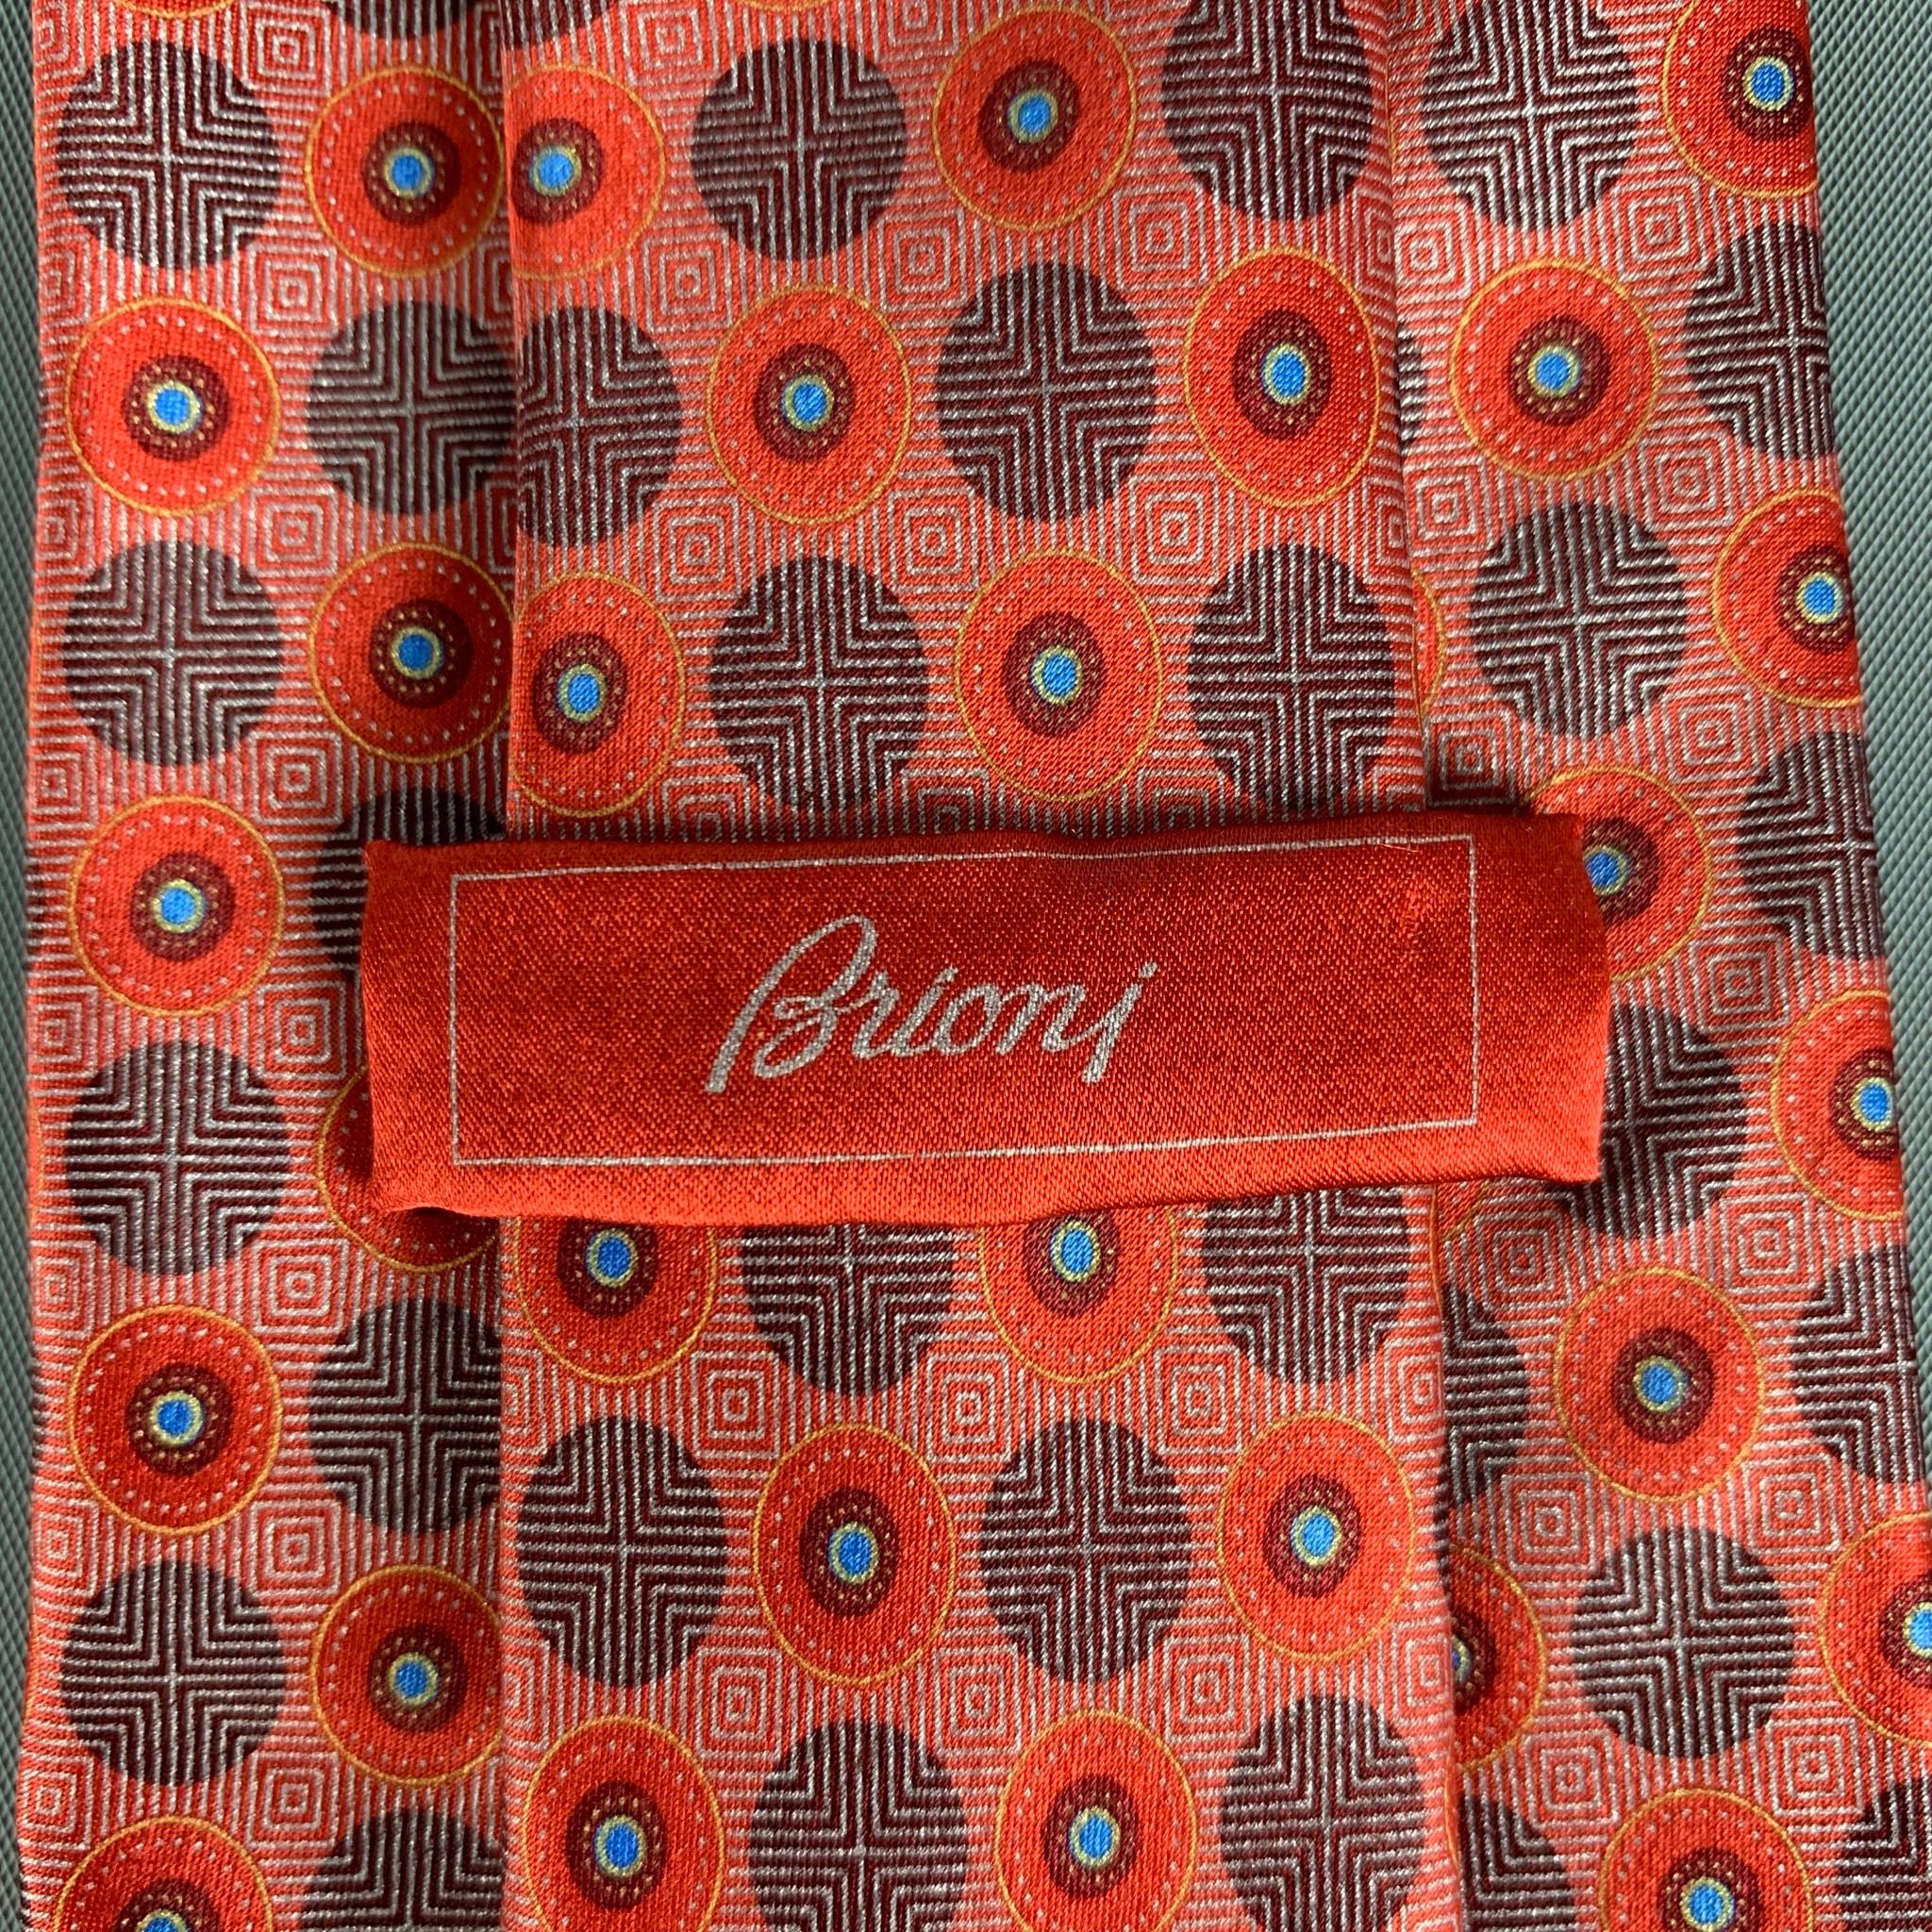 BRIONI neck tie comes in a red & black dot print silk. Made in Italy. 

Excellent Pre-Owned Condition.

Measurements:

Width: 3.5 in. 